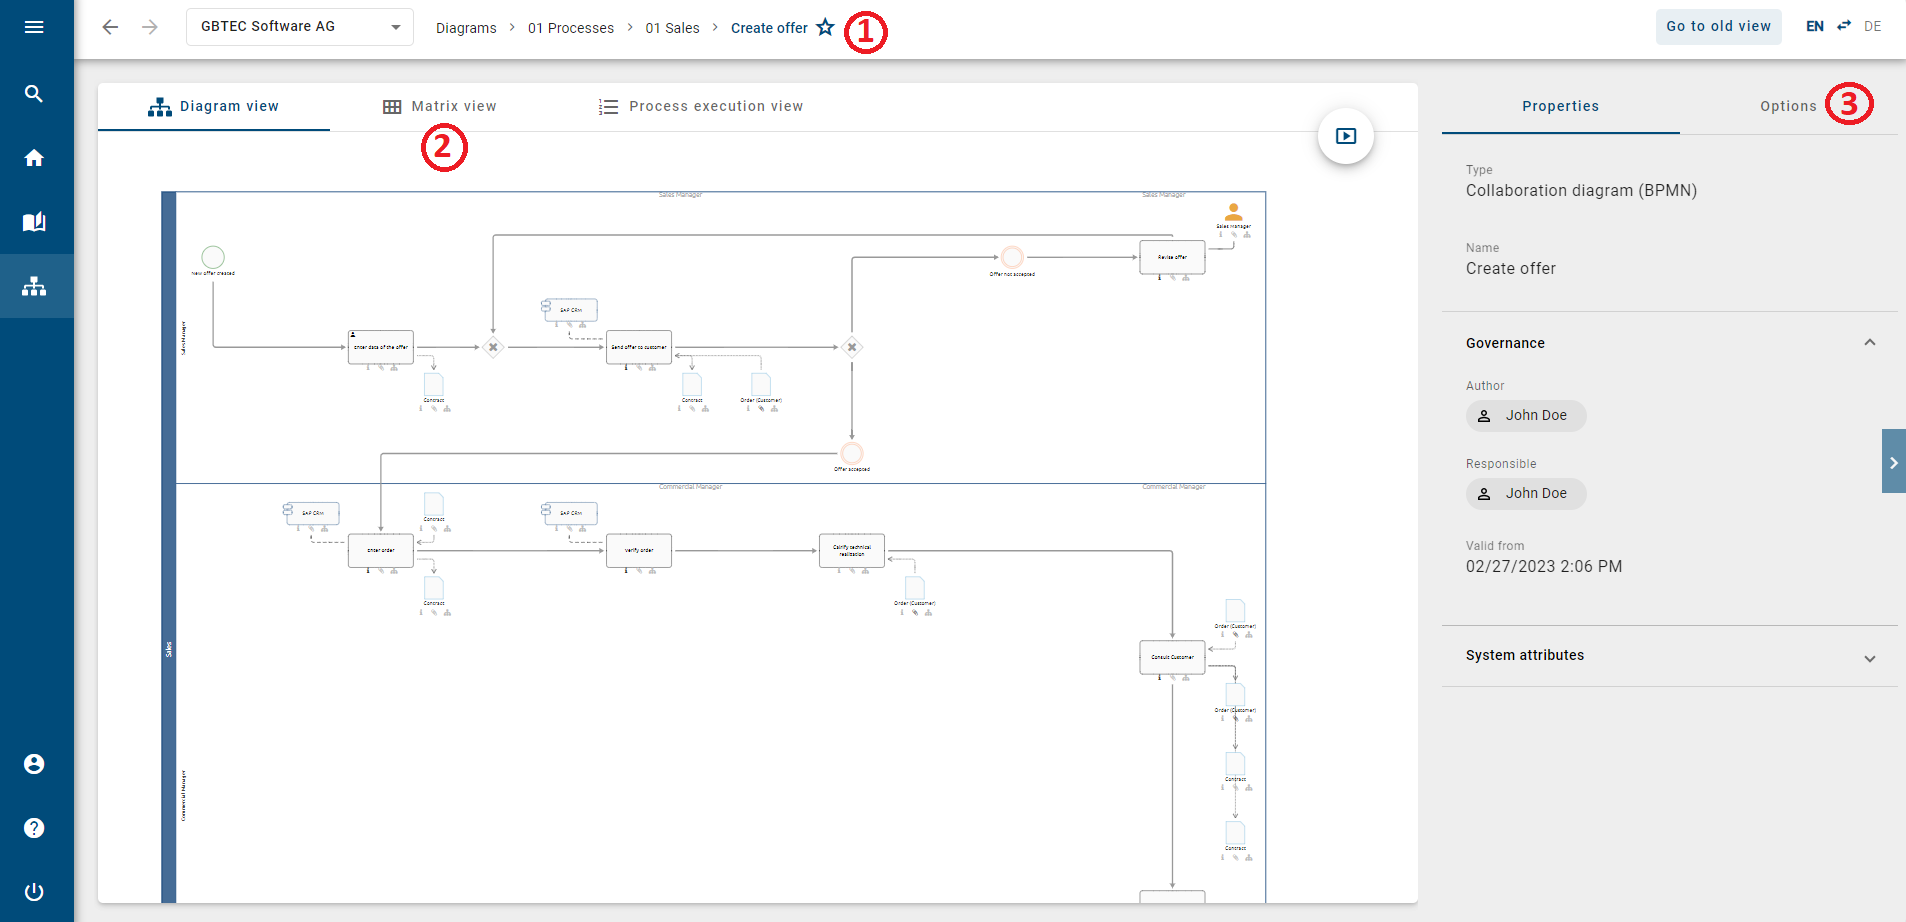 Here, the diagram view in the new user interface is displayed.